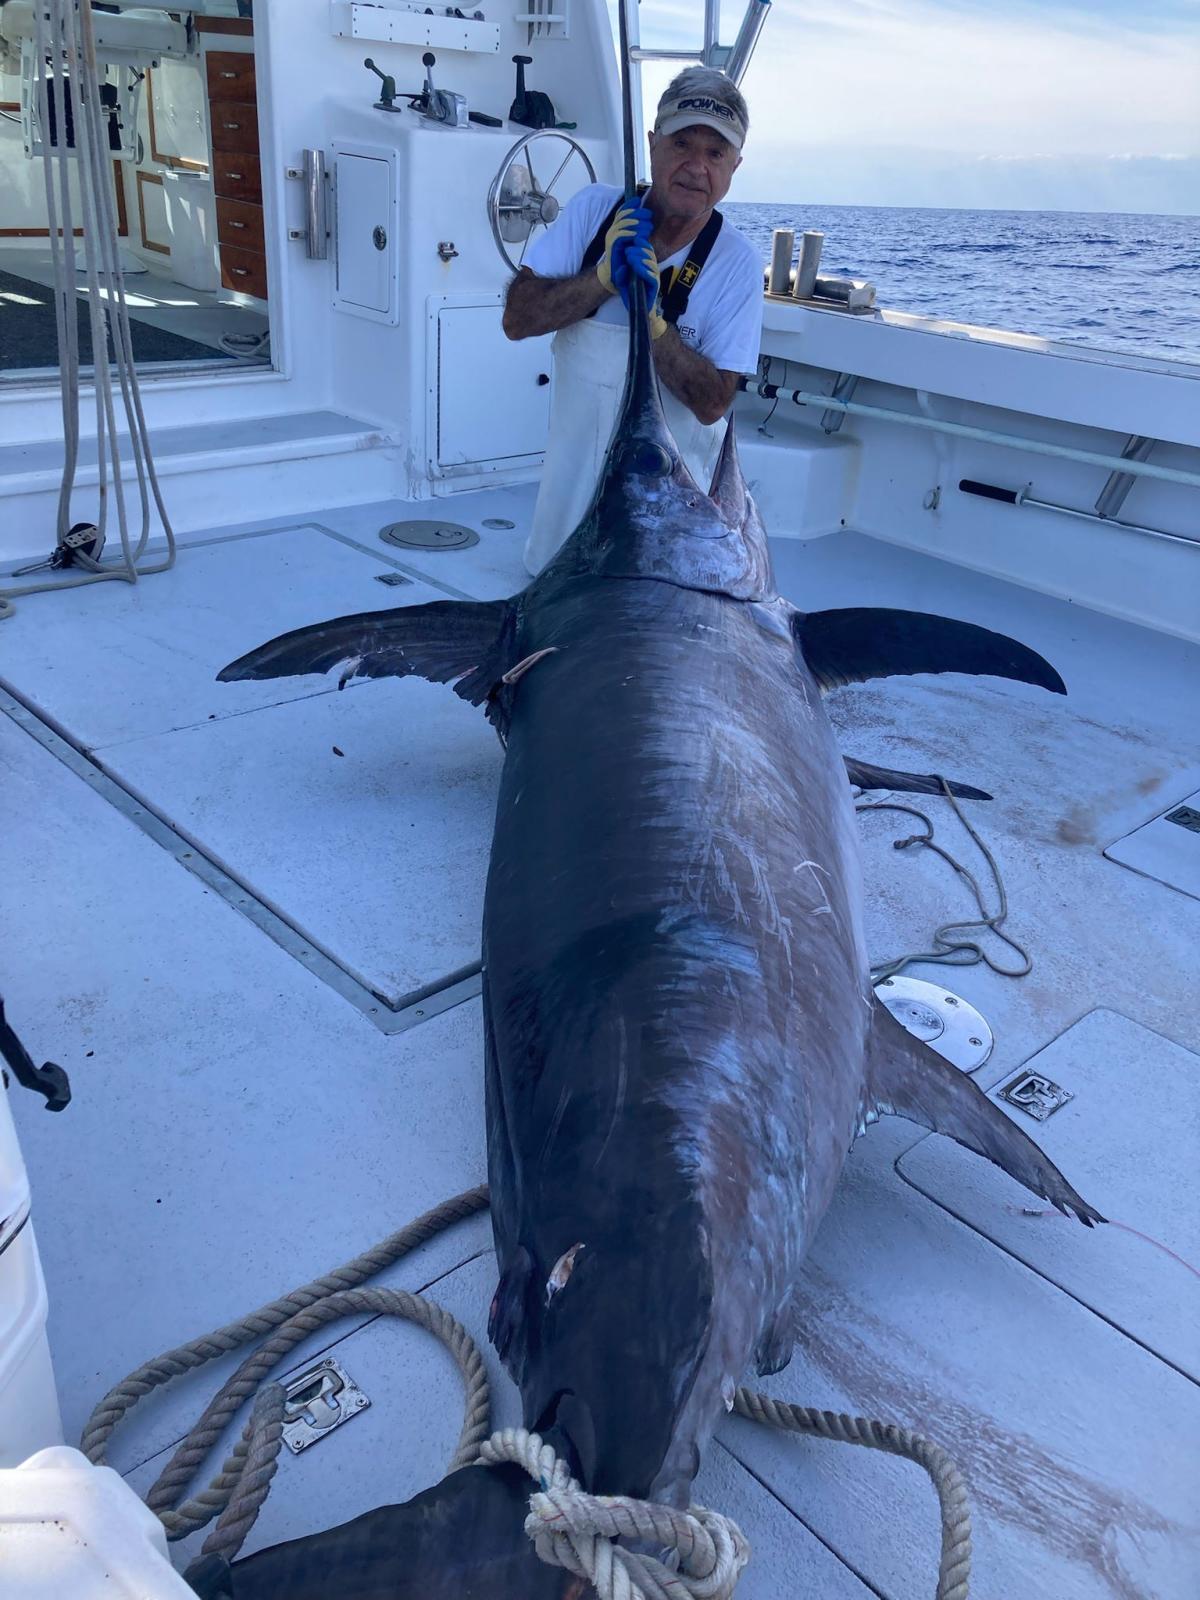 Florida angler catches giant fish. Here's how big sea creature was